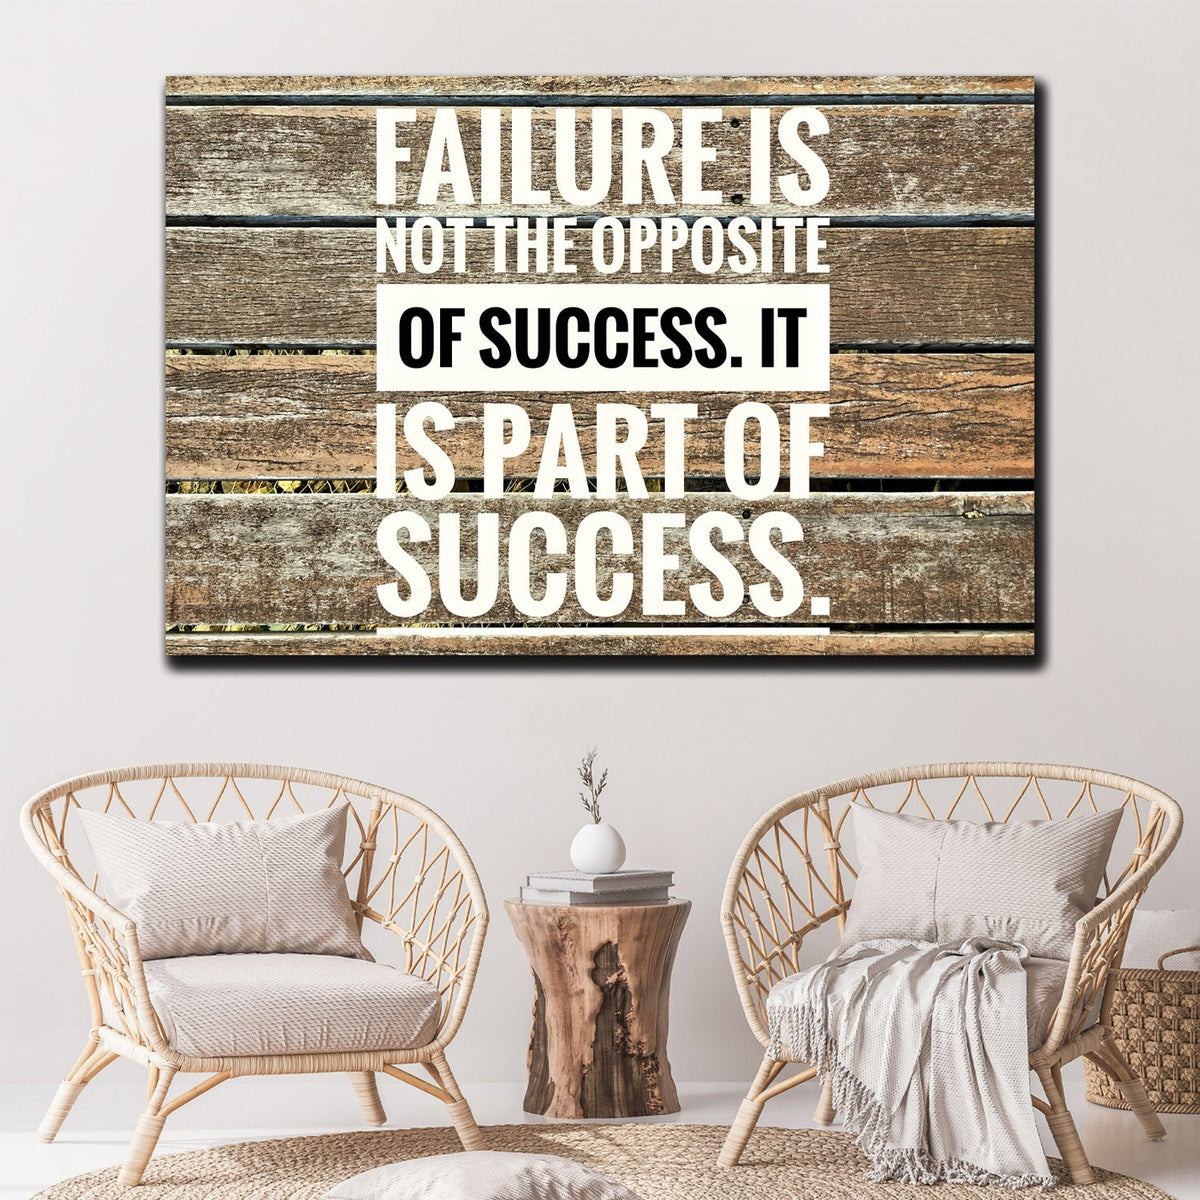 https://cdn.shopify.com/s/files/1/0387/9986/8044/products/FailureQuoteCanvasArtprintStretched-4.jpg